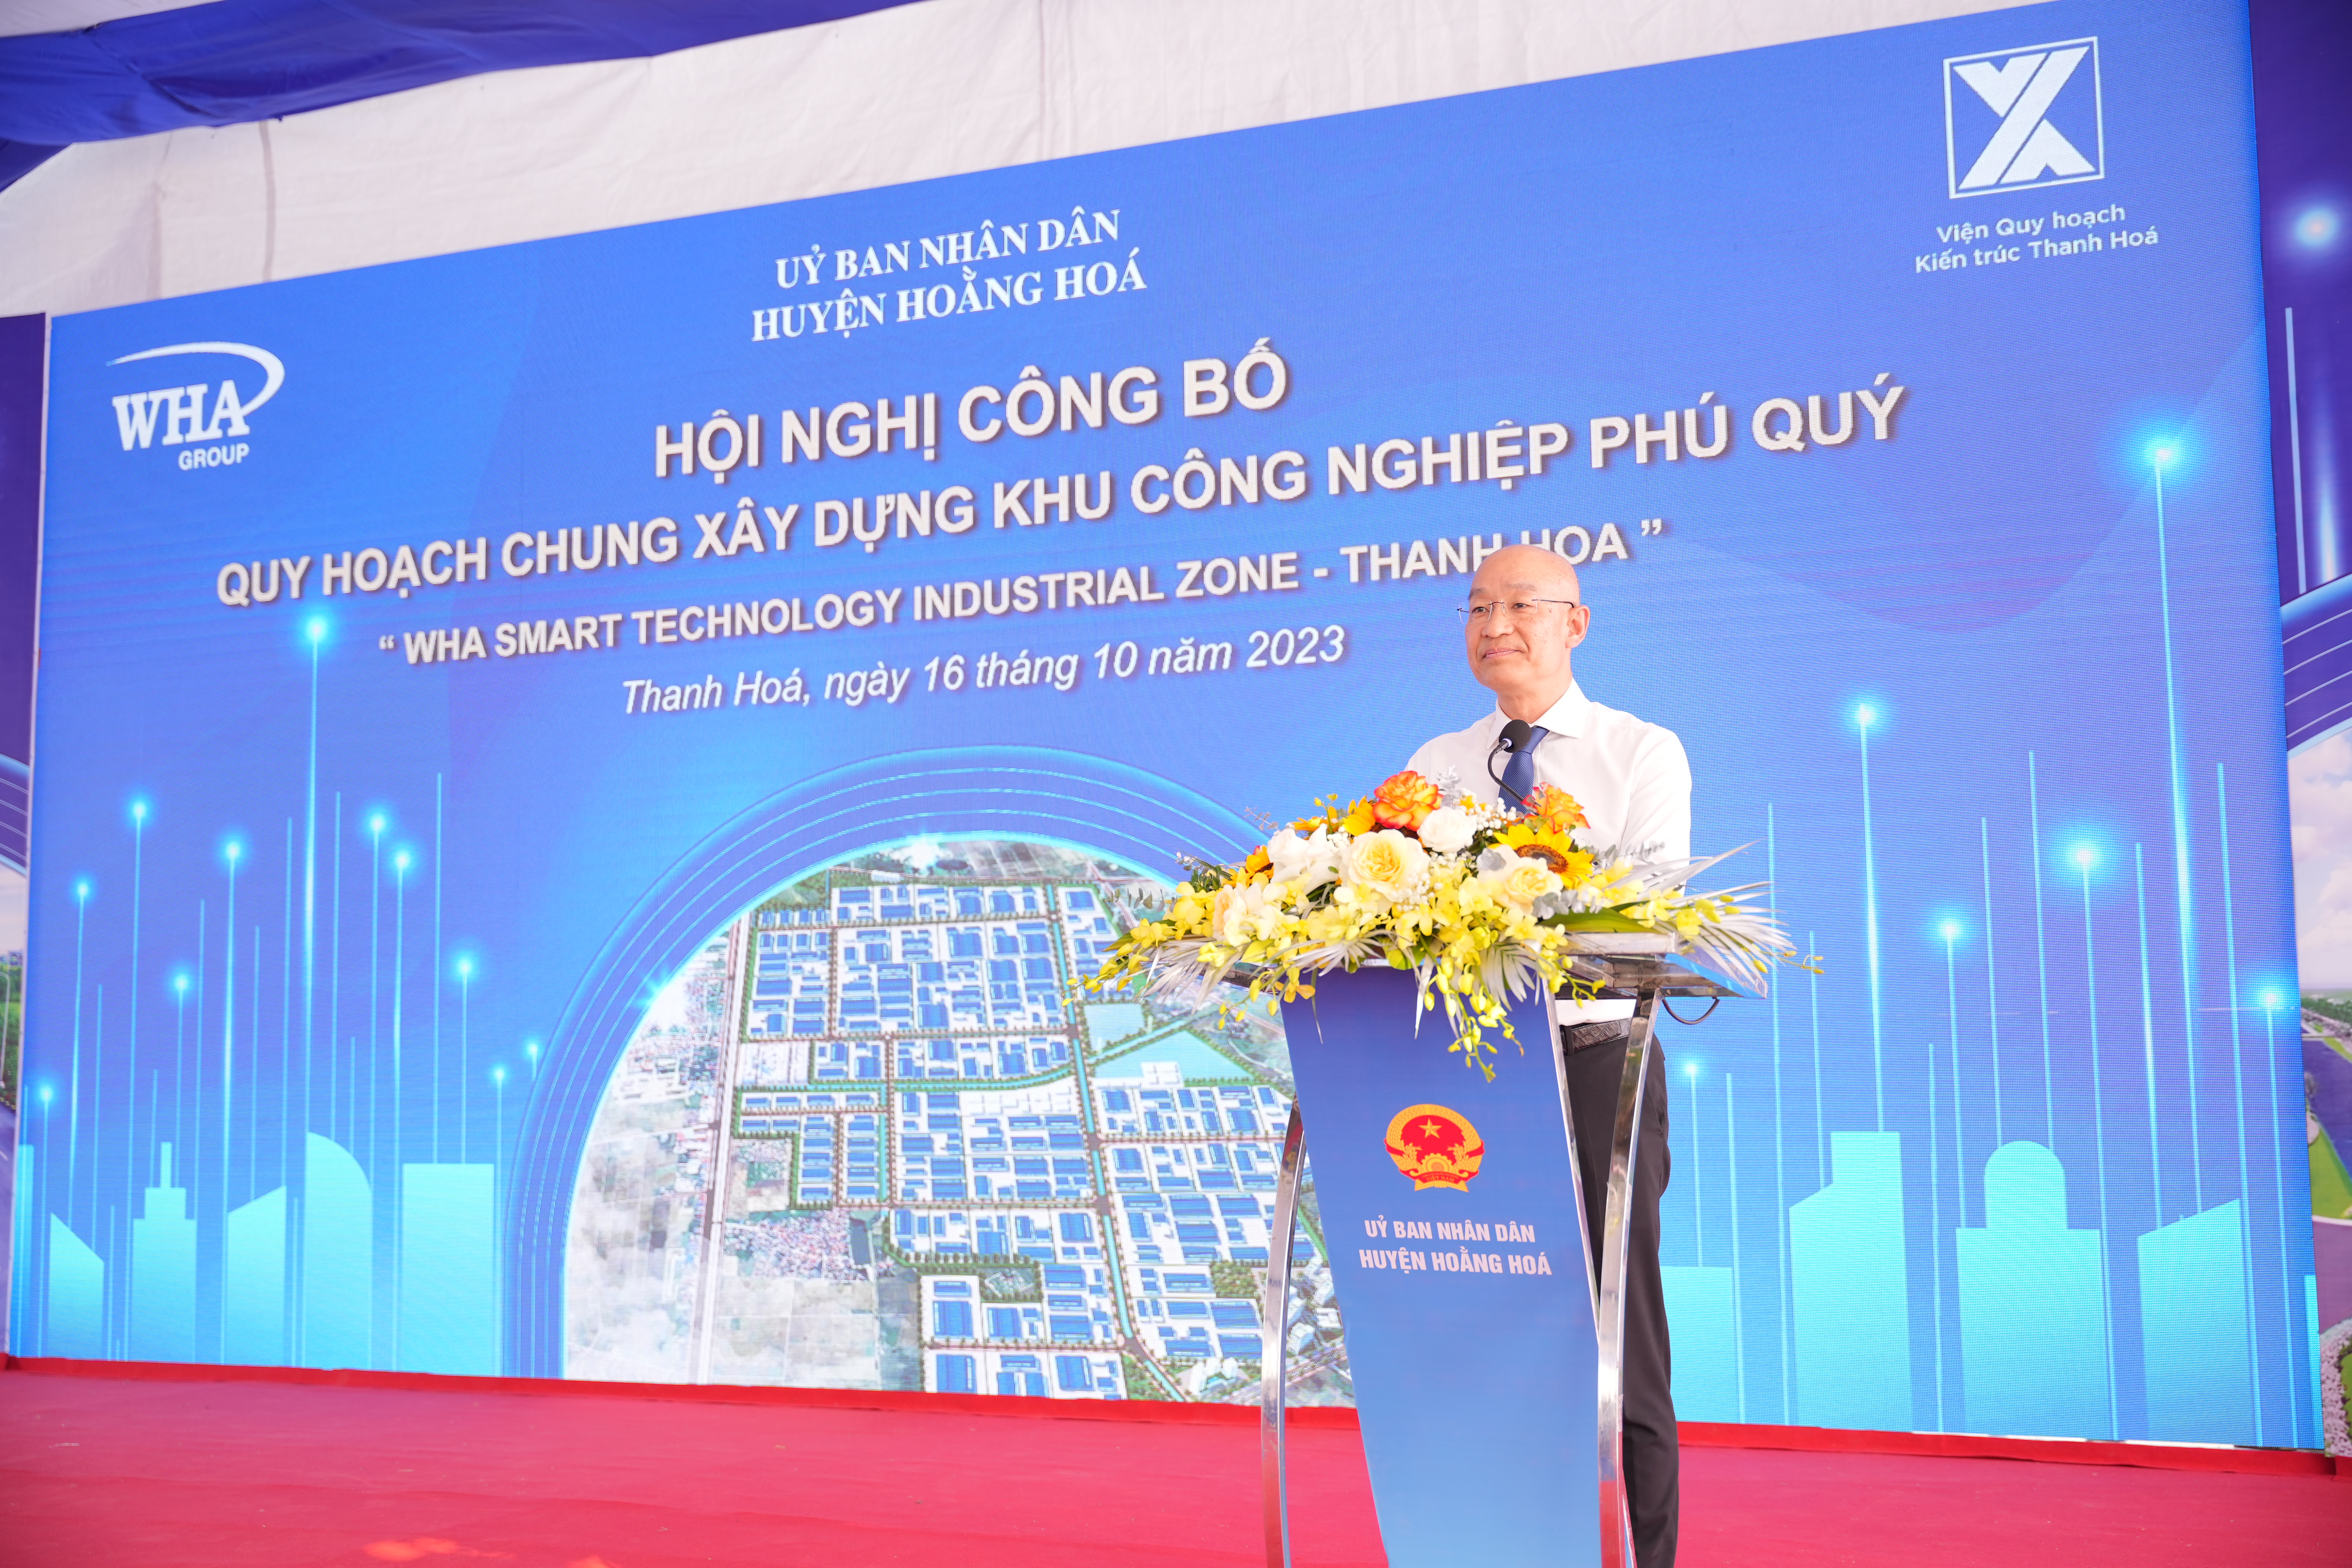 WHA Group Announces Project Master Plan Approval for WHA Smart Technology Industrial Zone - Thanh Hoa